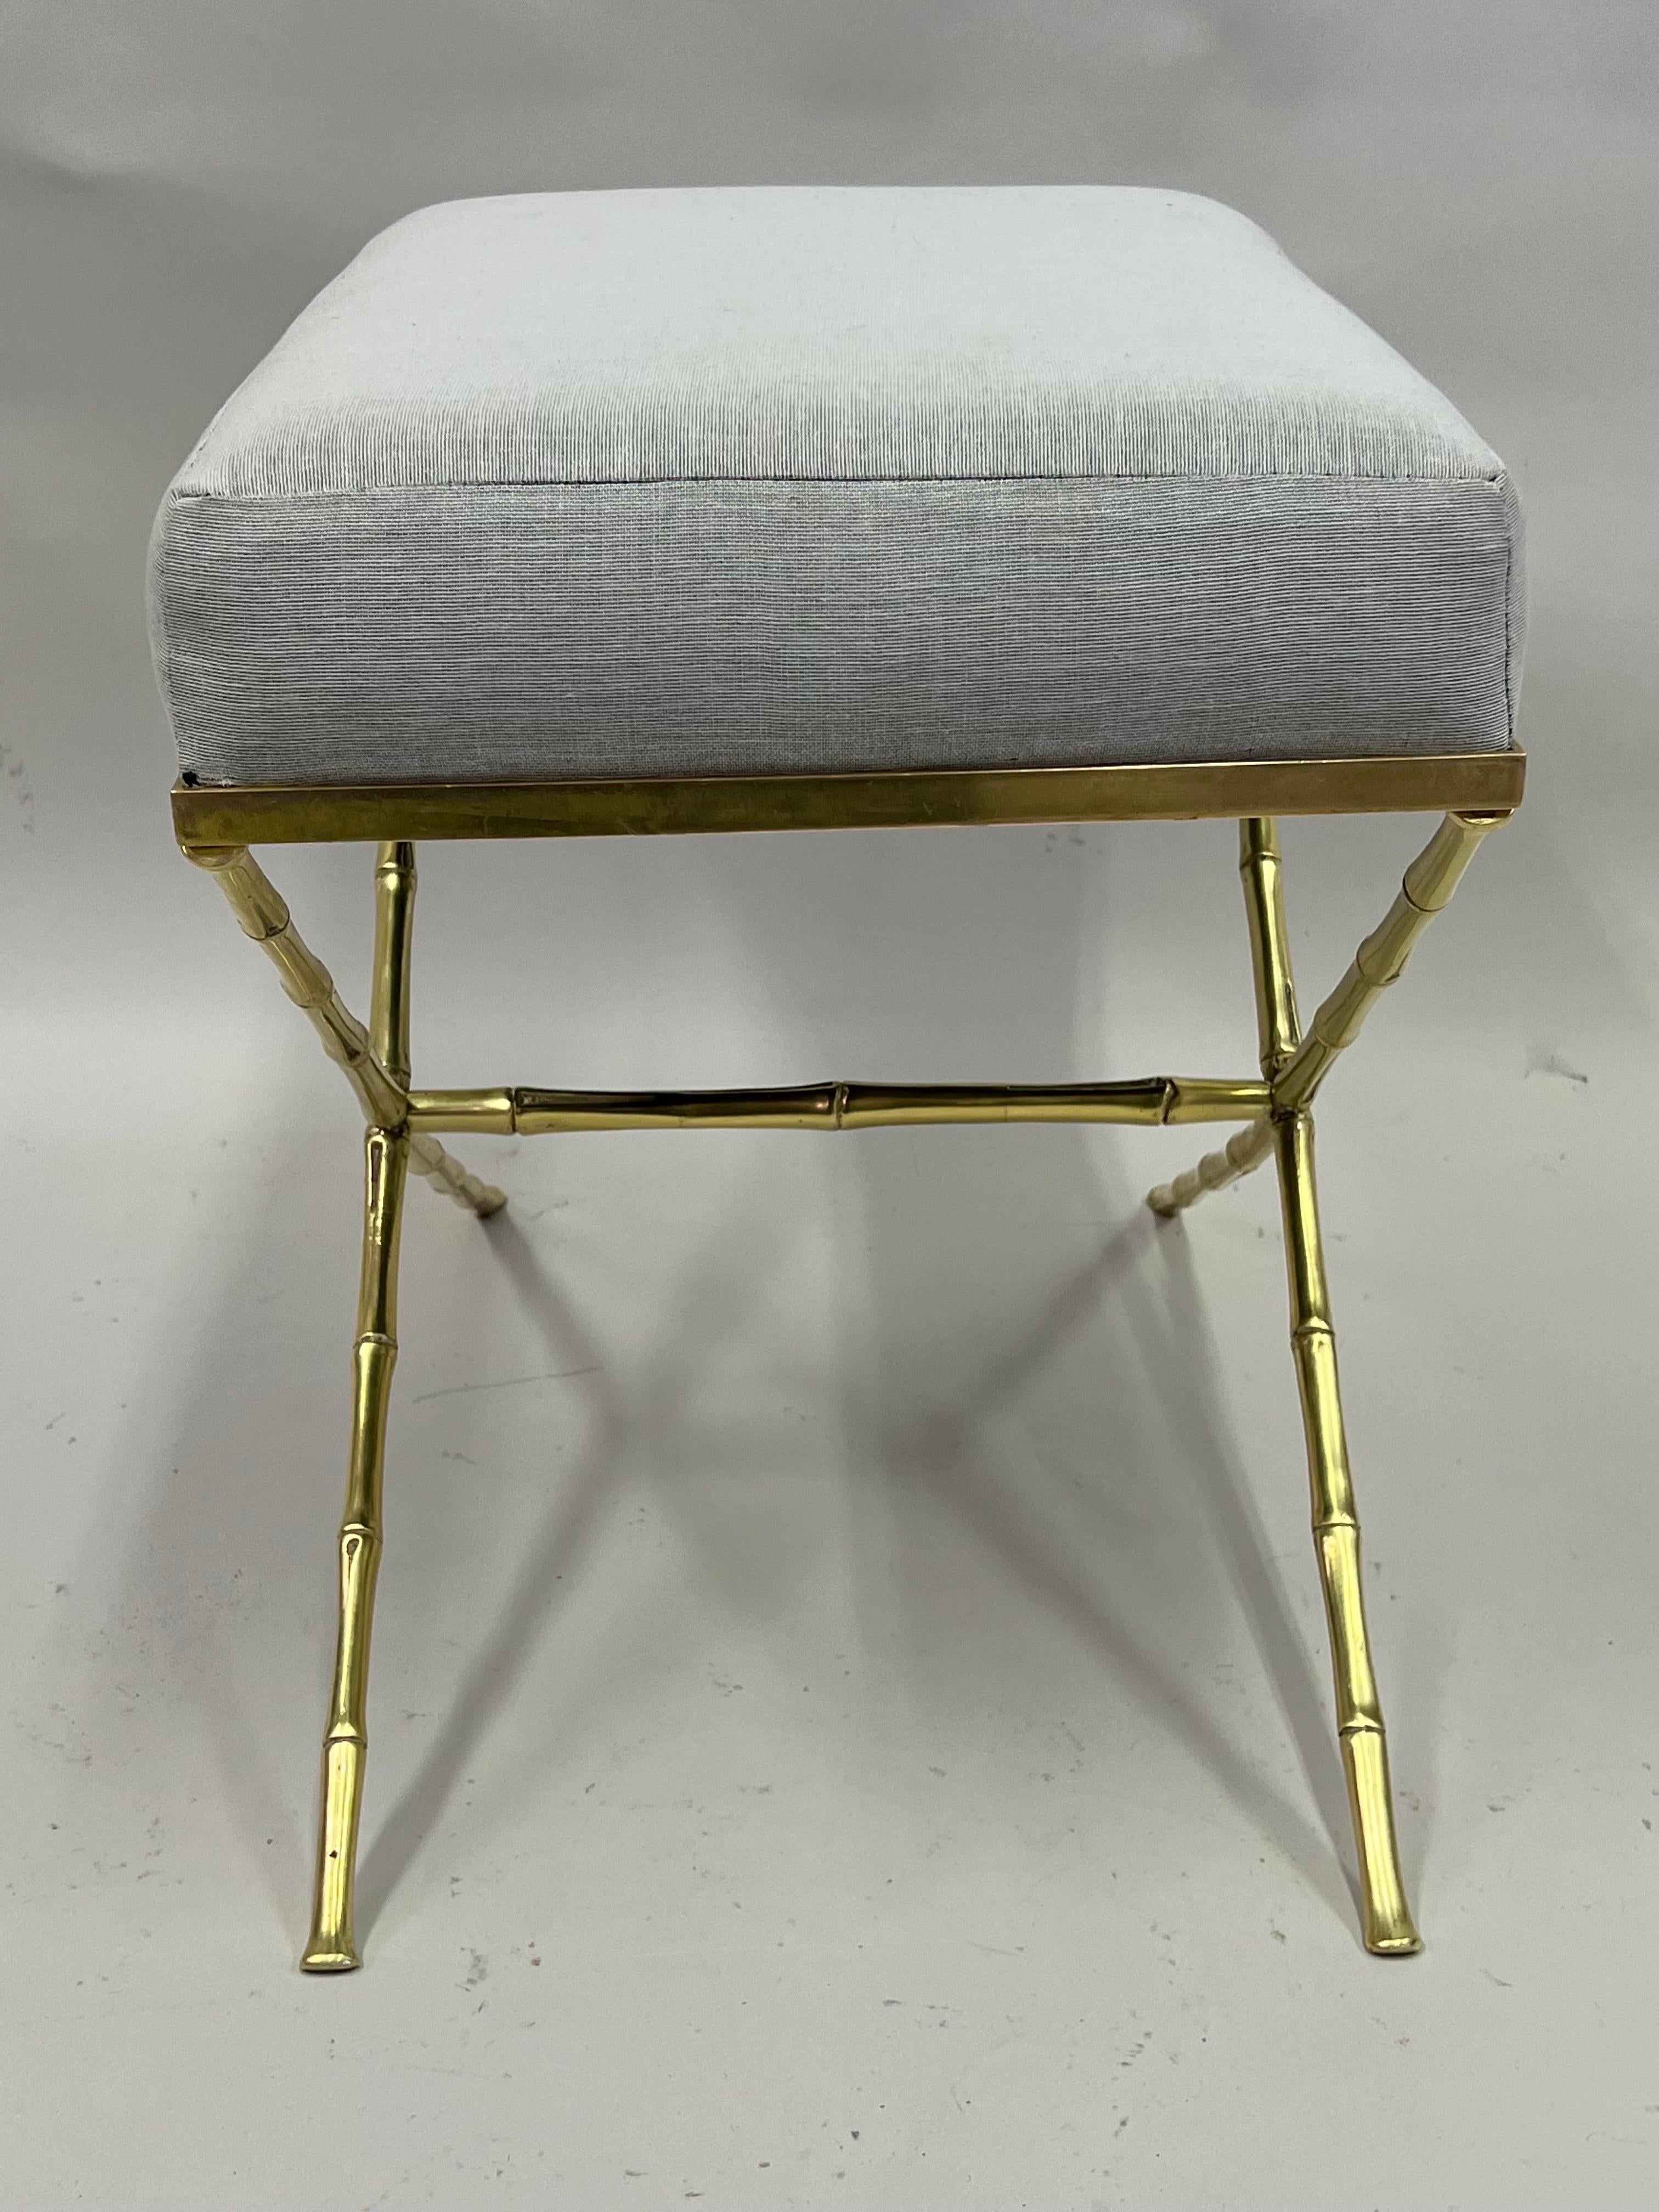 French Mid-Century Modern Neoclassical Brass Faux Bamboo Bench by Maison Baguès For Sale 6